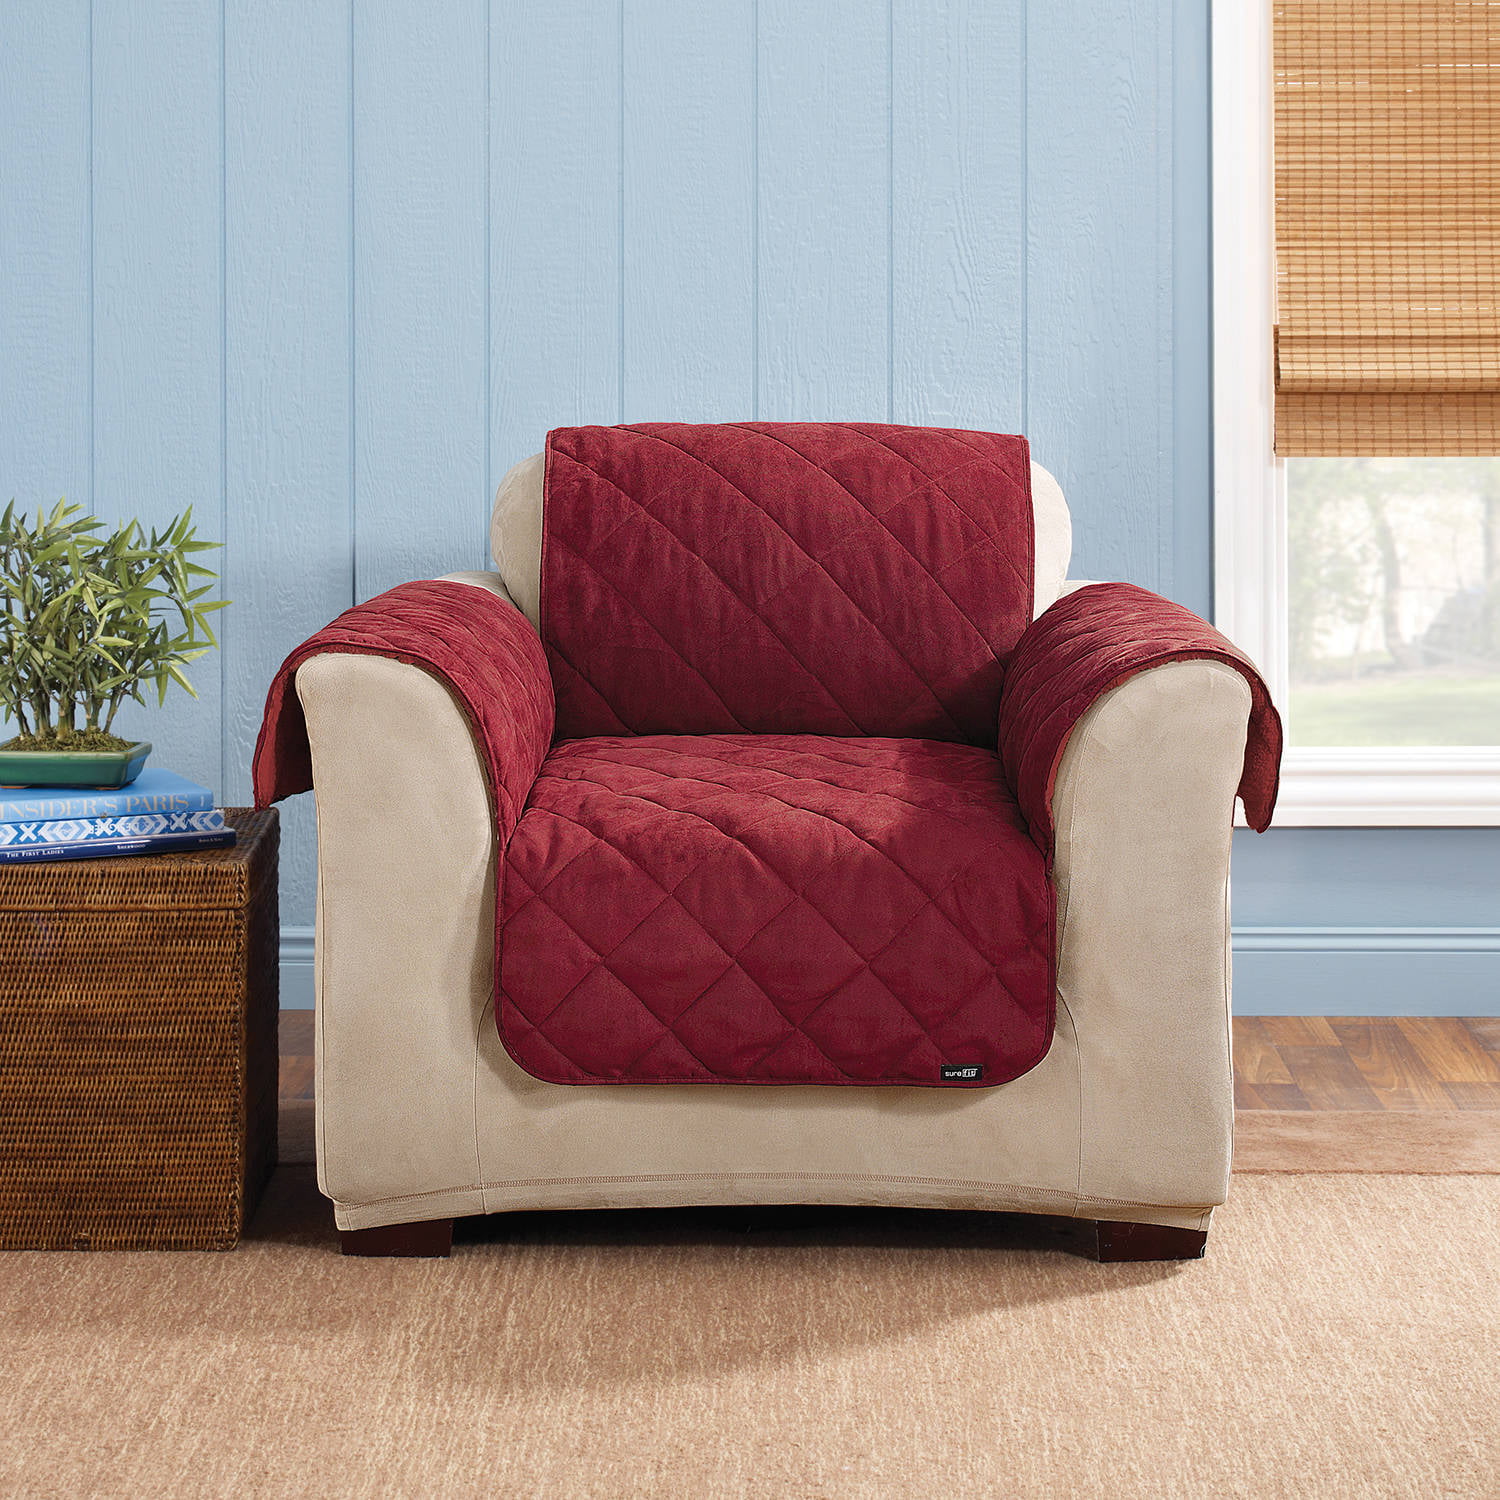 Sure Fit Suede and Sherpa Reversible Chair Furniture Cover in Burgundy 